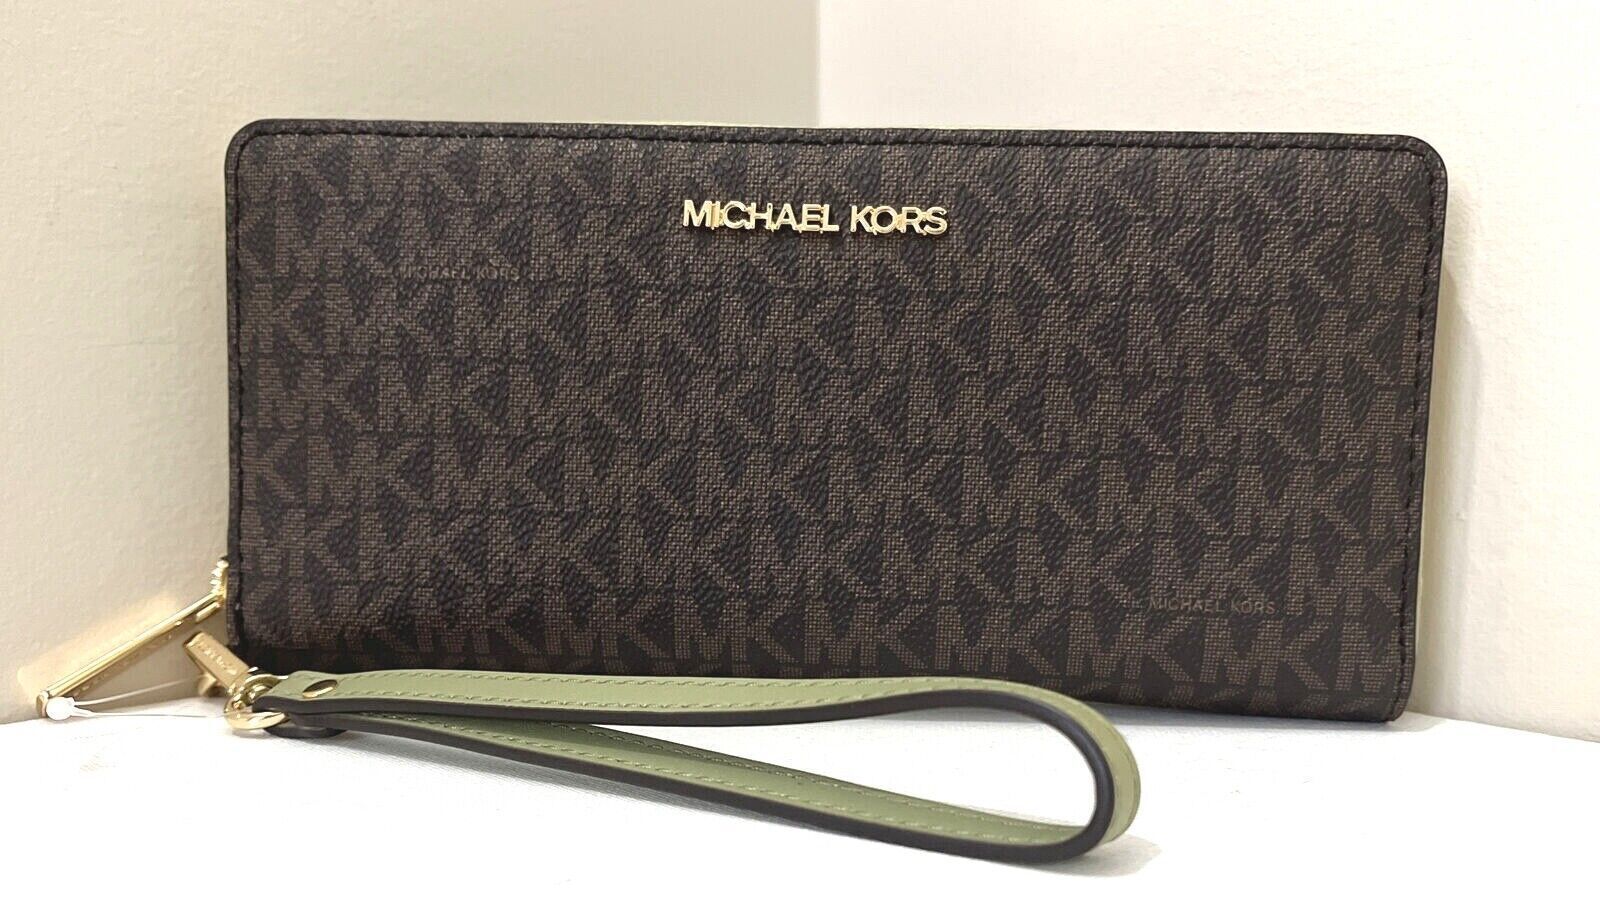 Primary image for Michael Kors LG Continental Wallet Brown Army Green Wristlet 35F8GTVT3B NWT FS Y